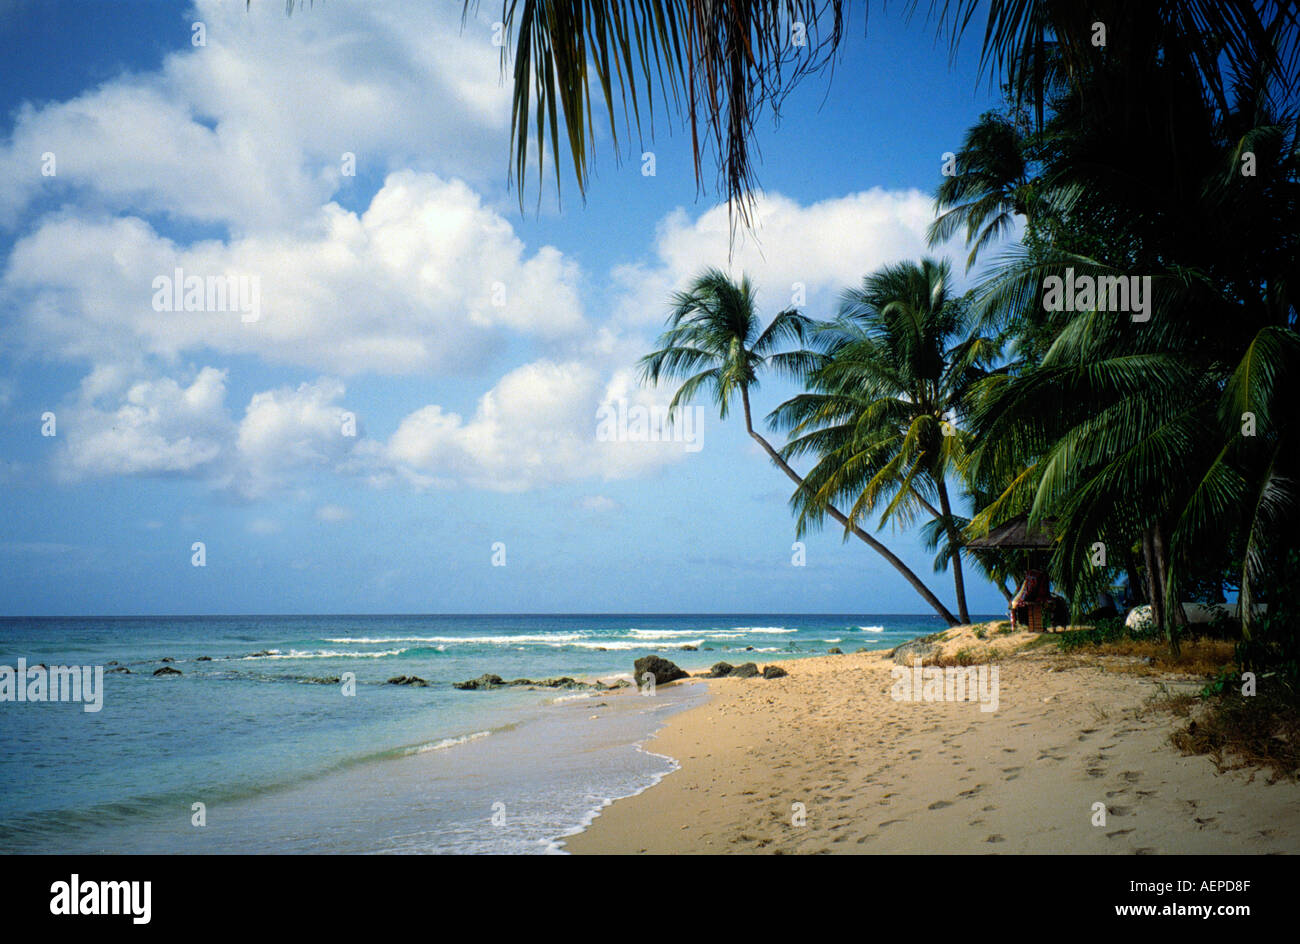 palmtrees at beach island of barbados archipelago of the lesser antilles caribbean Stock Photo